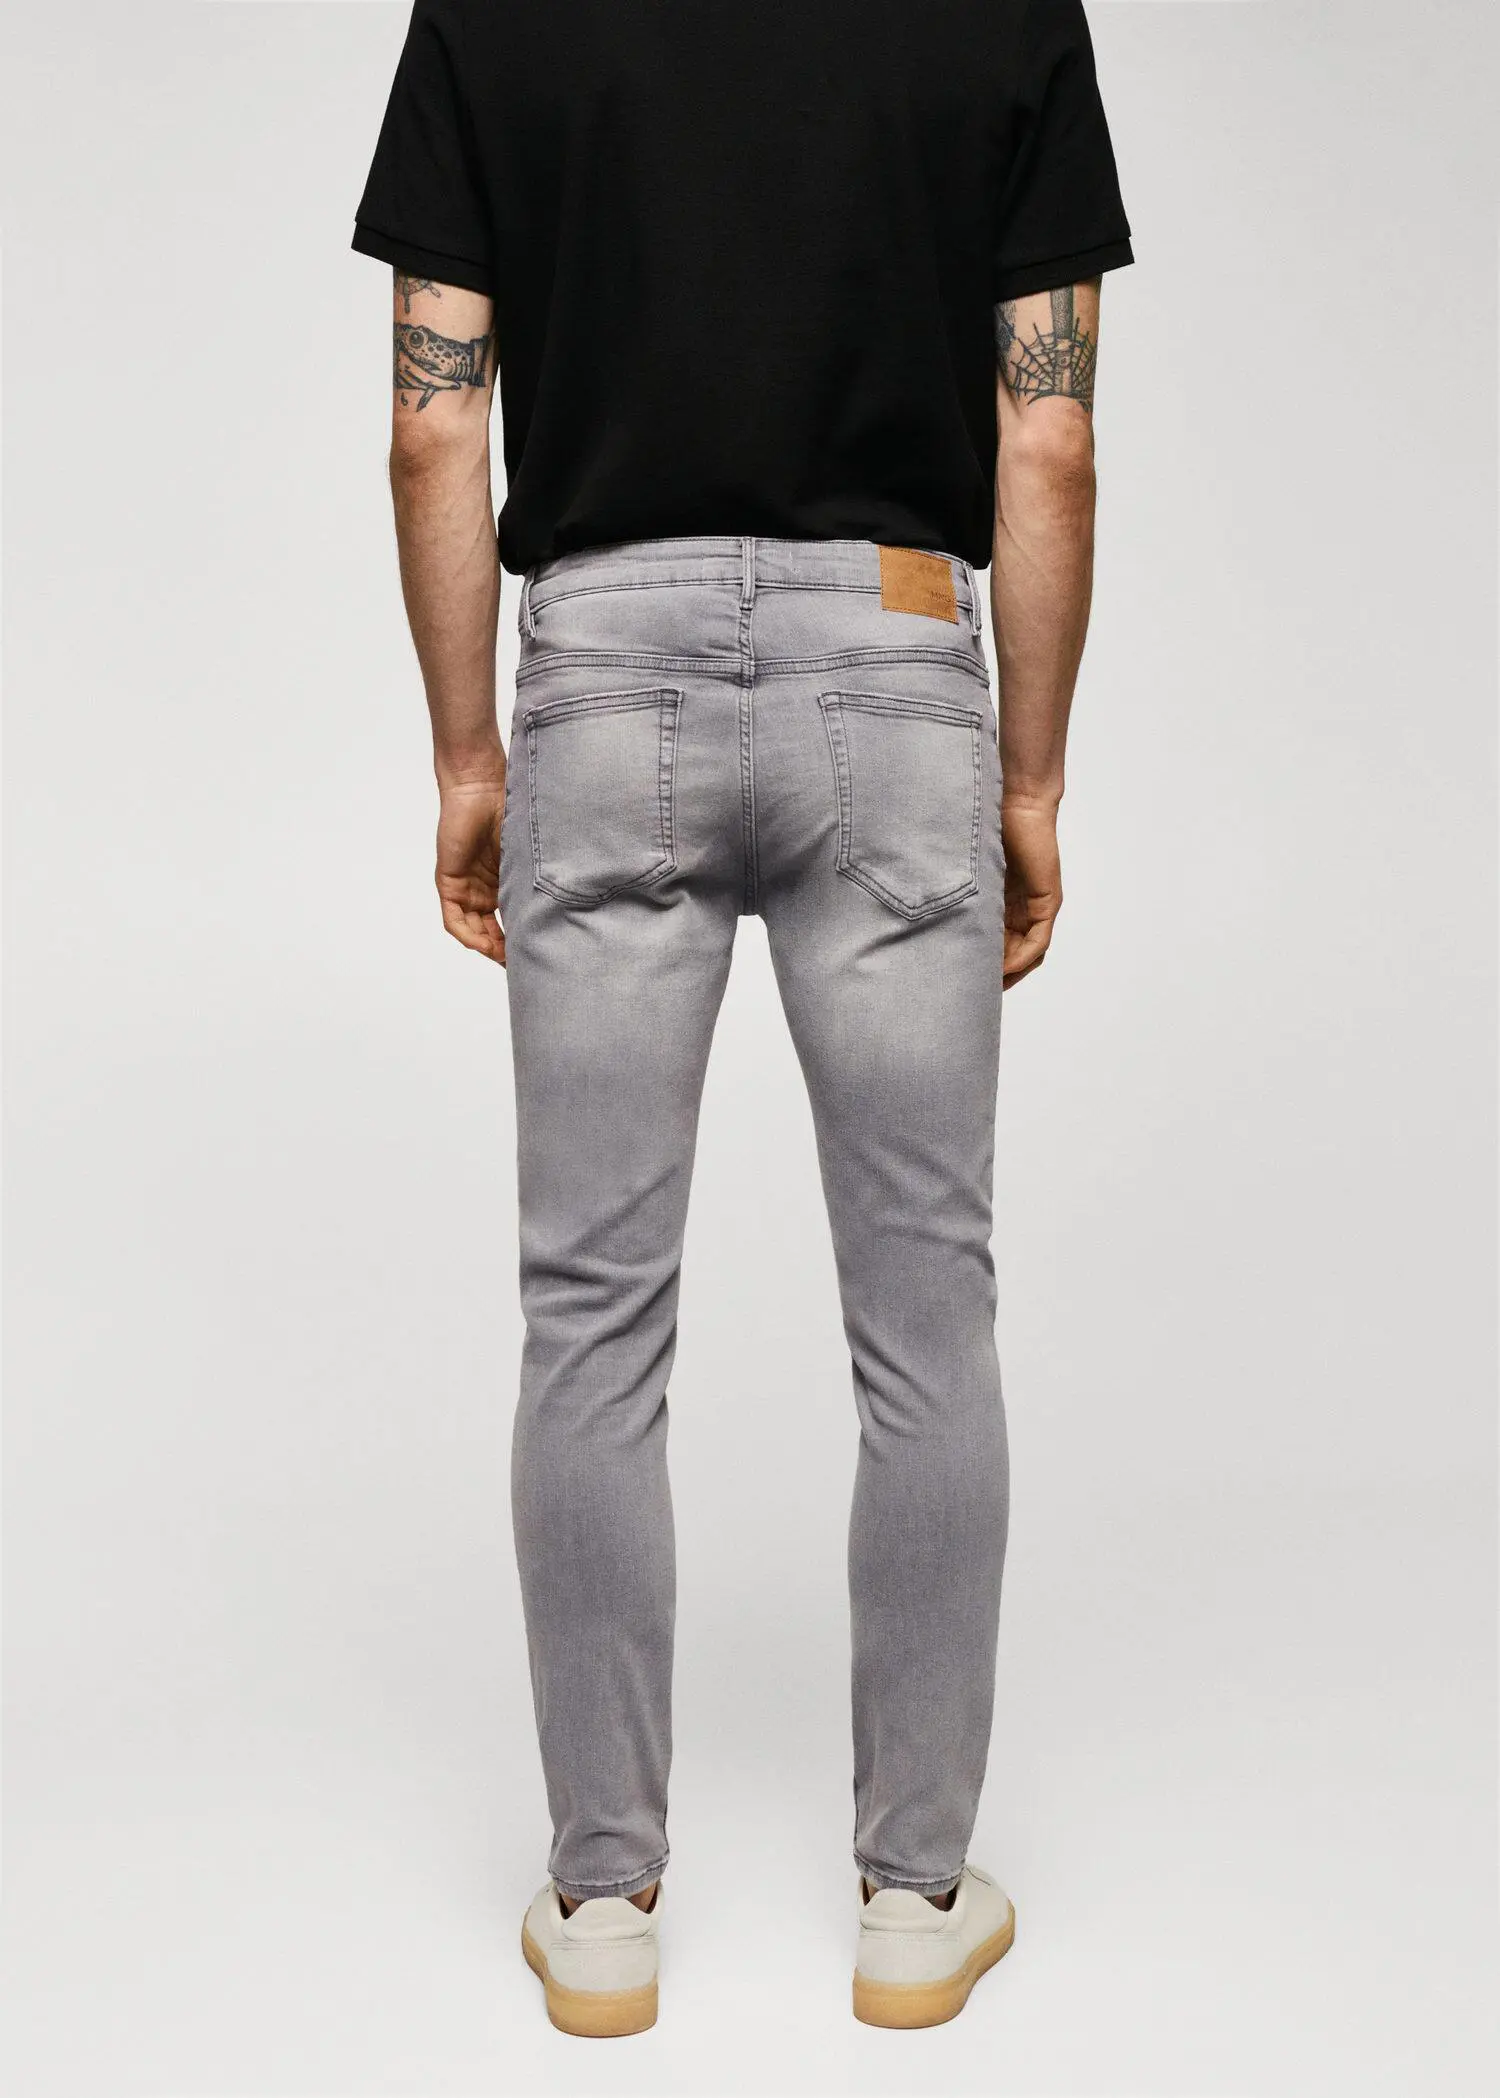 Mango Jude skinny-fit jeans. a person wearing grey jeans and a black shirt. 